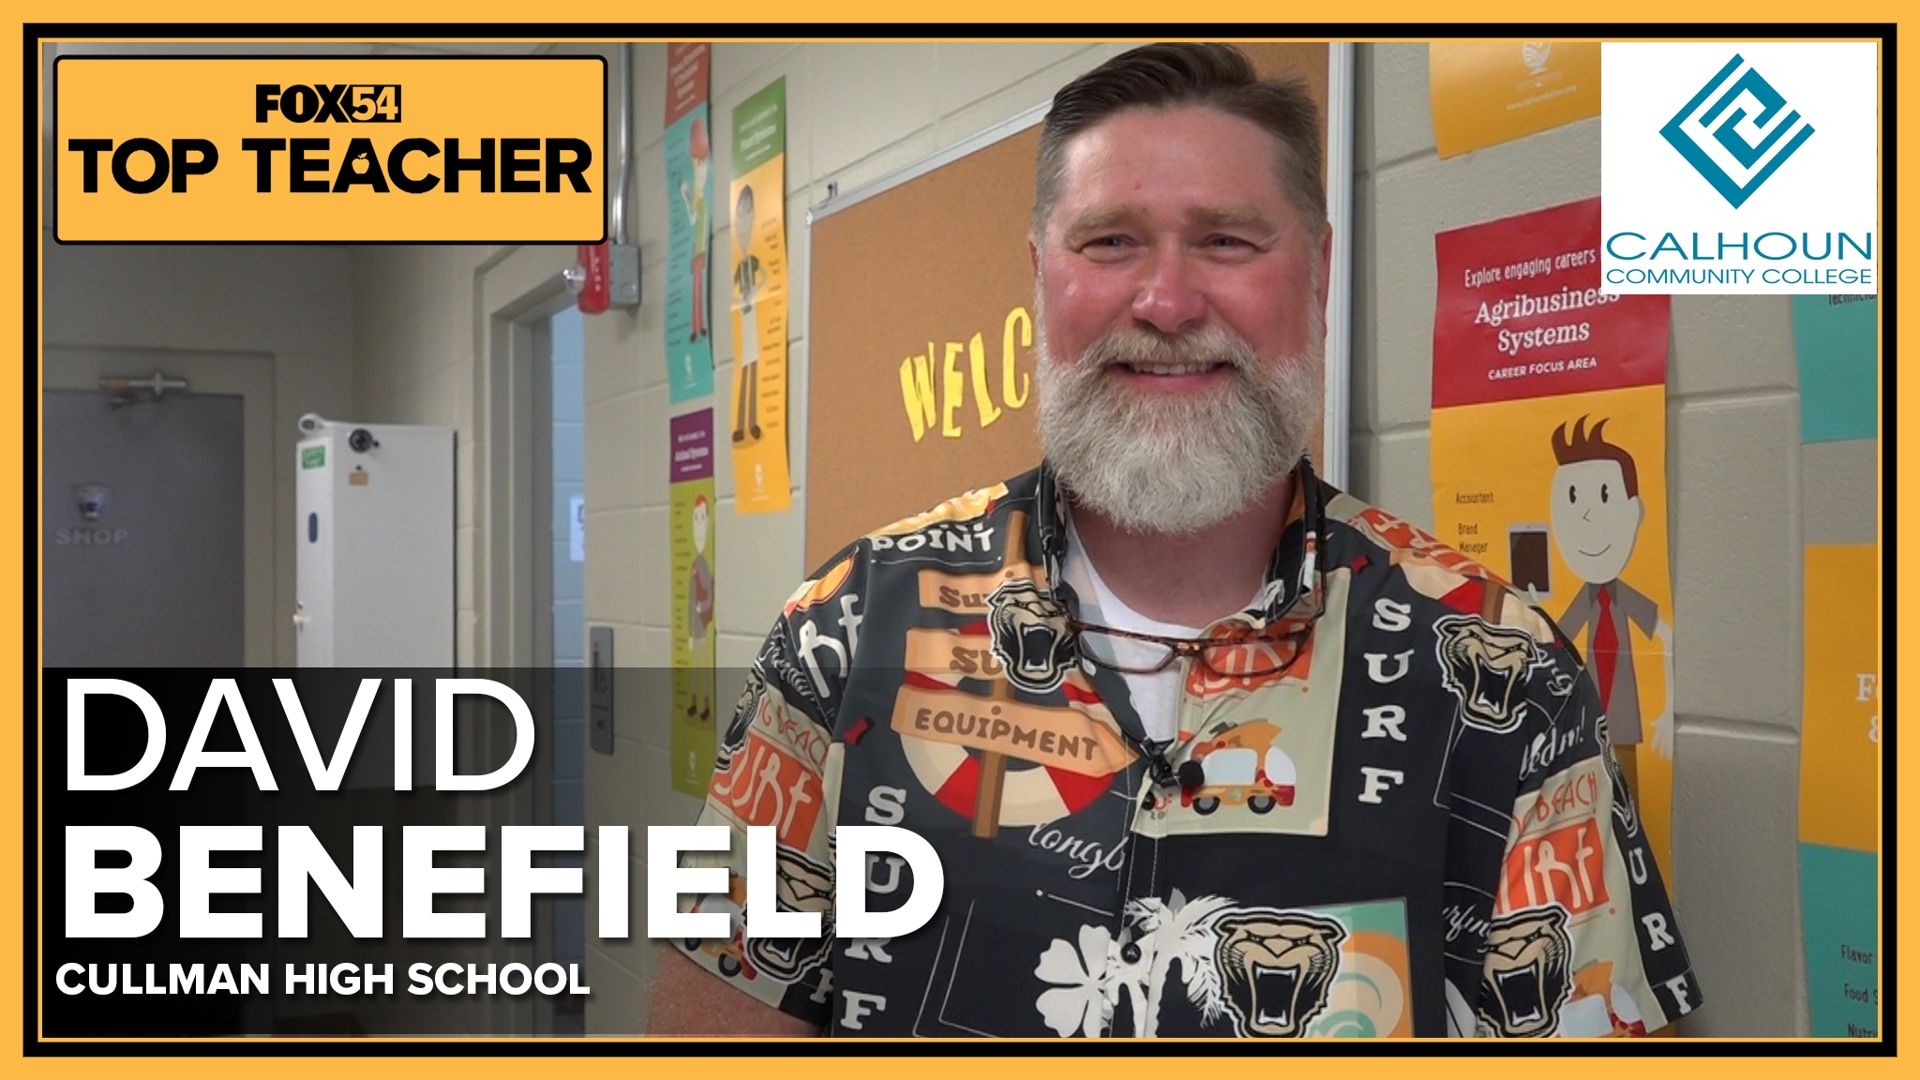 David Benefield has been teaching for 30 years.